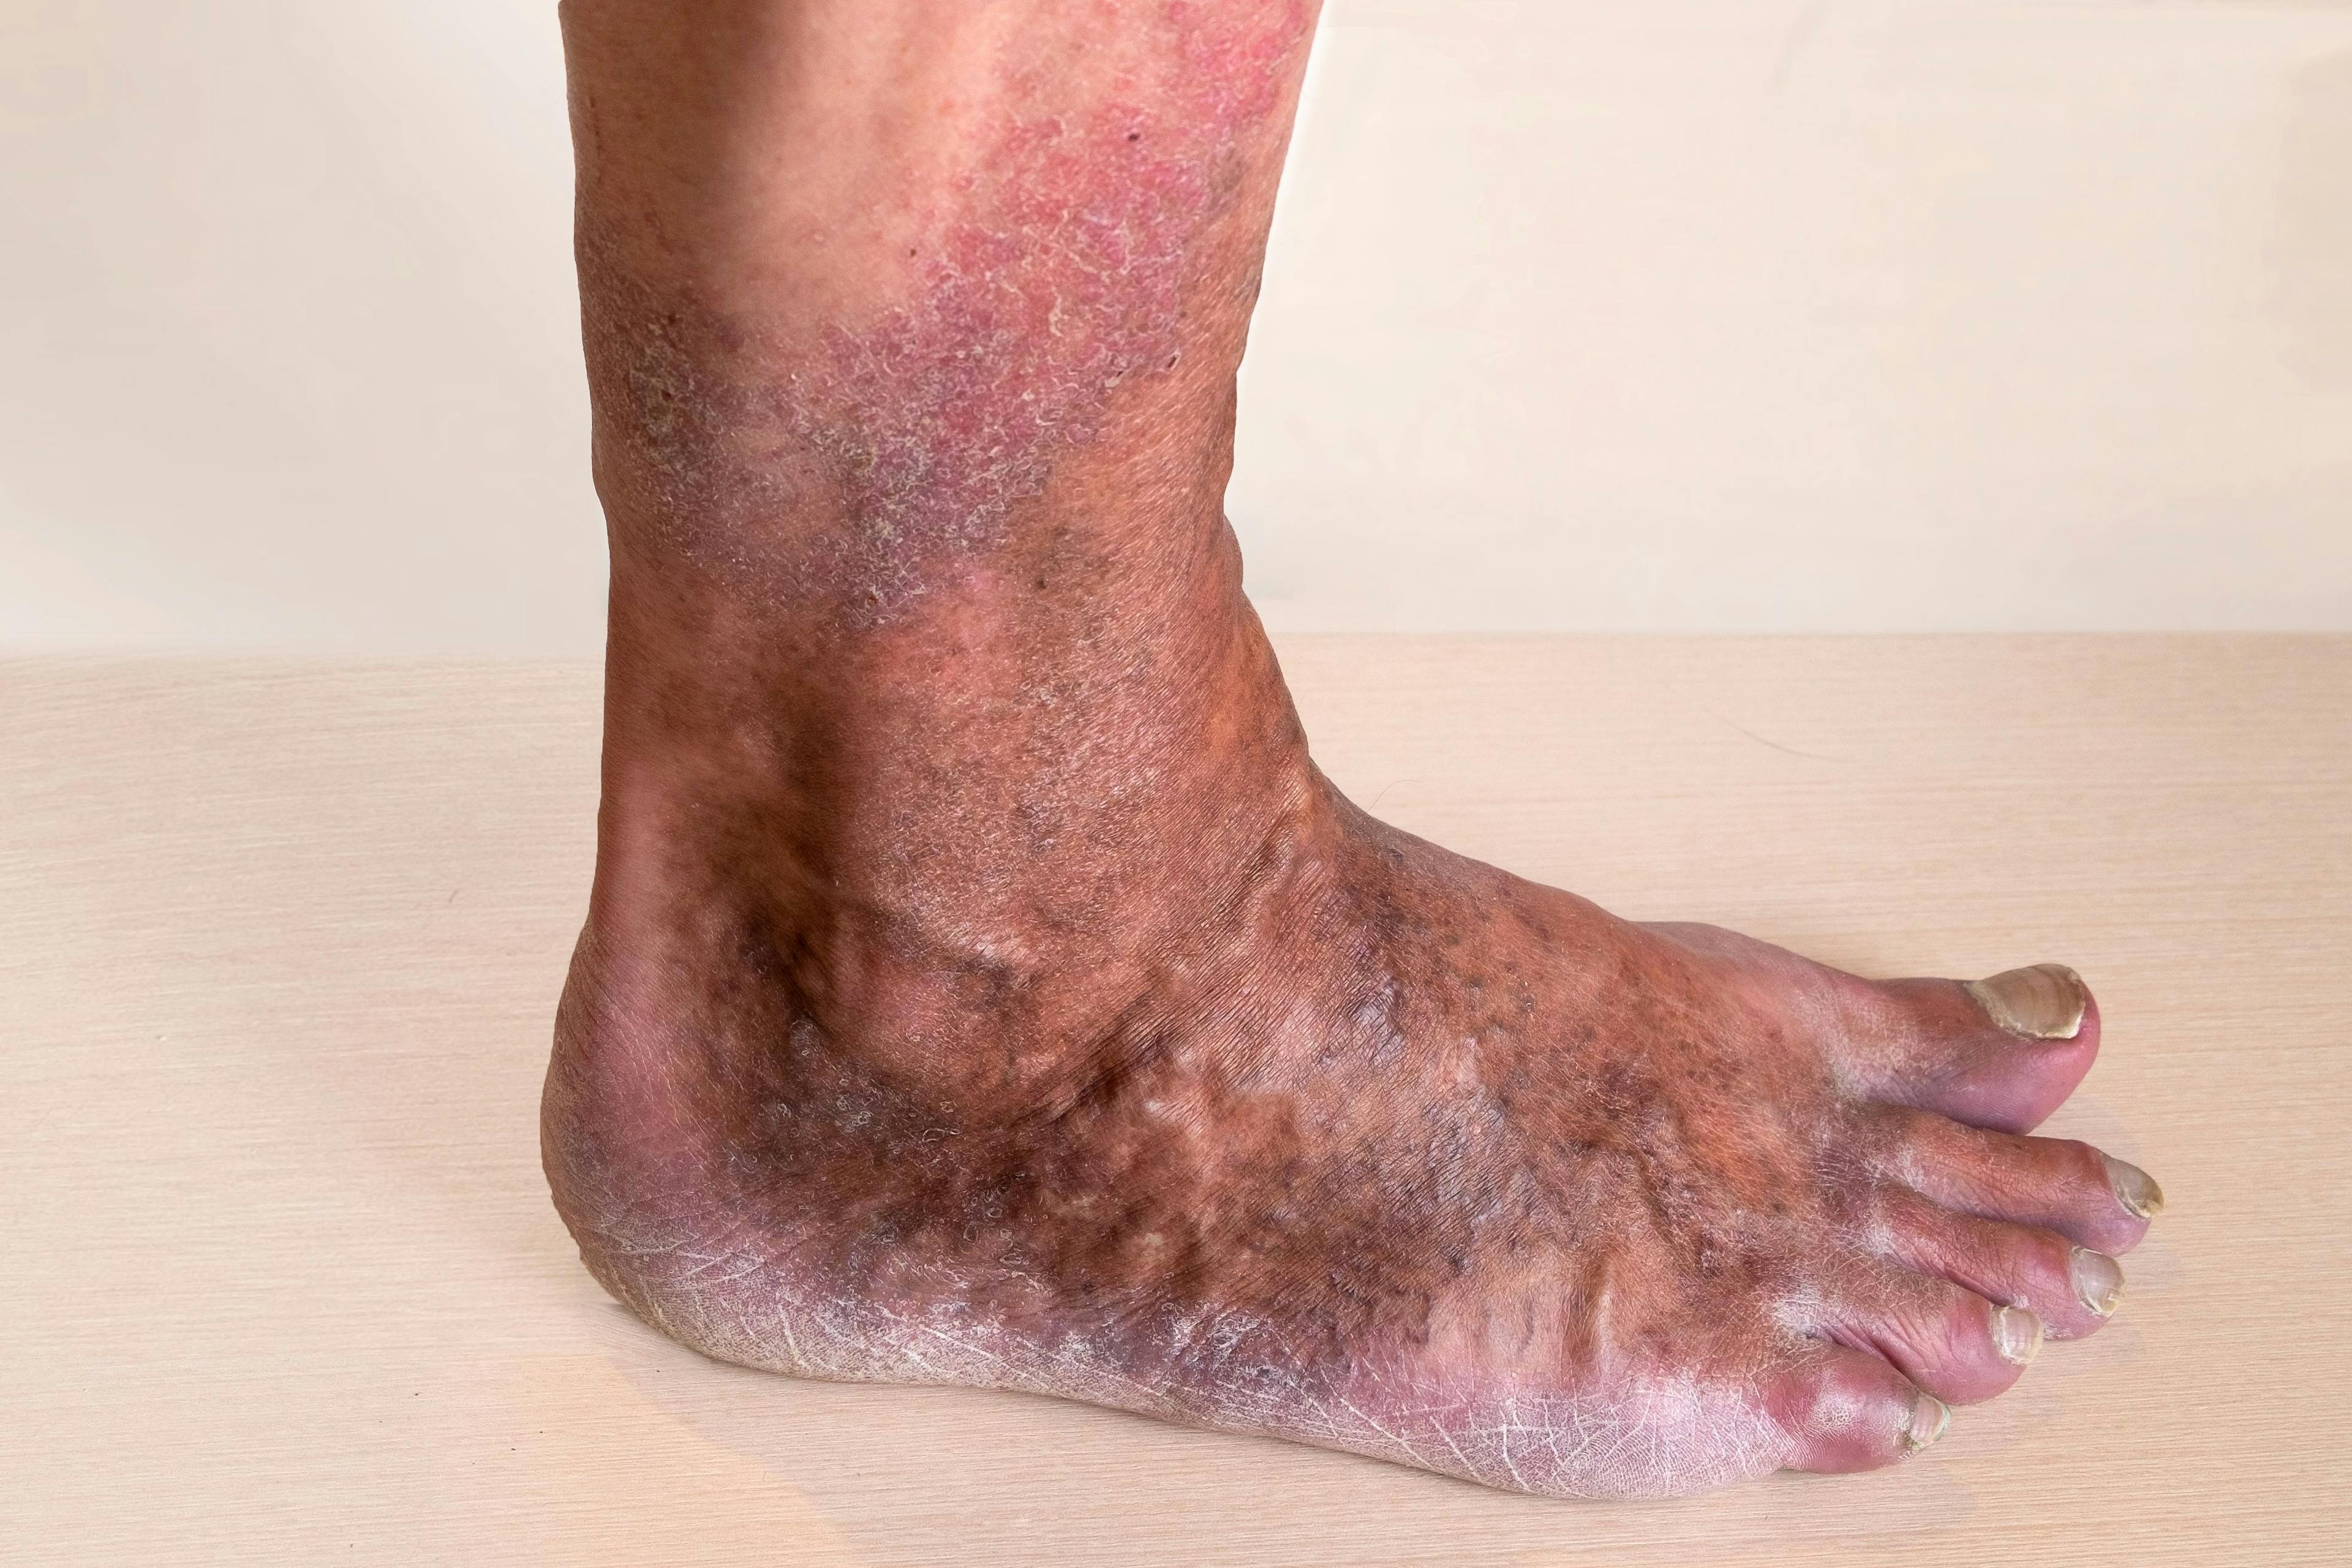 Remote Assessments Show Crisaborole Ointment Eases Stasis Dermatitis 